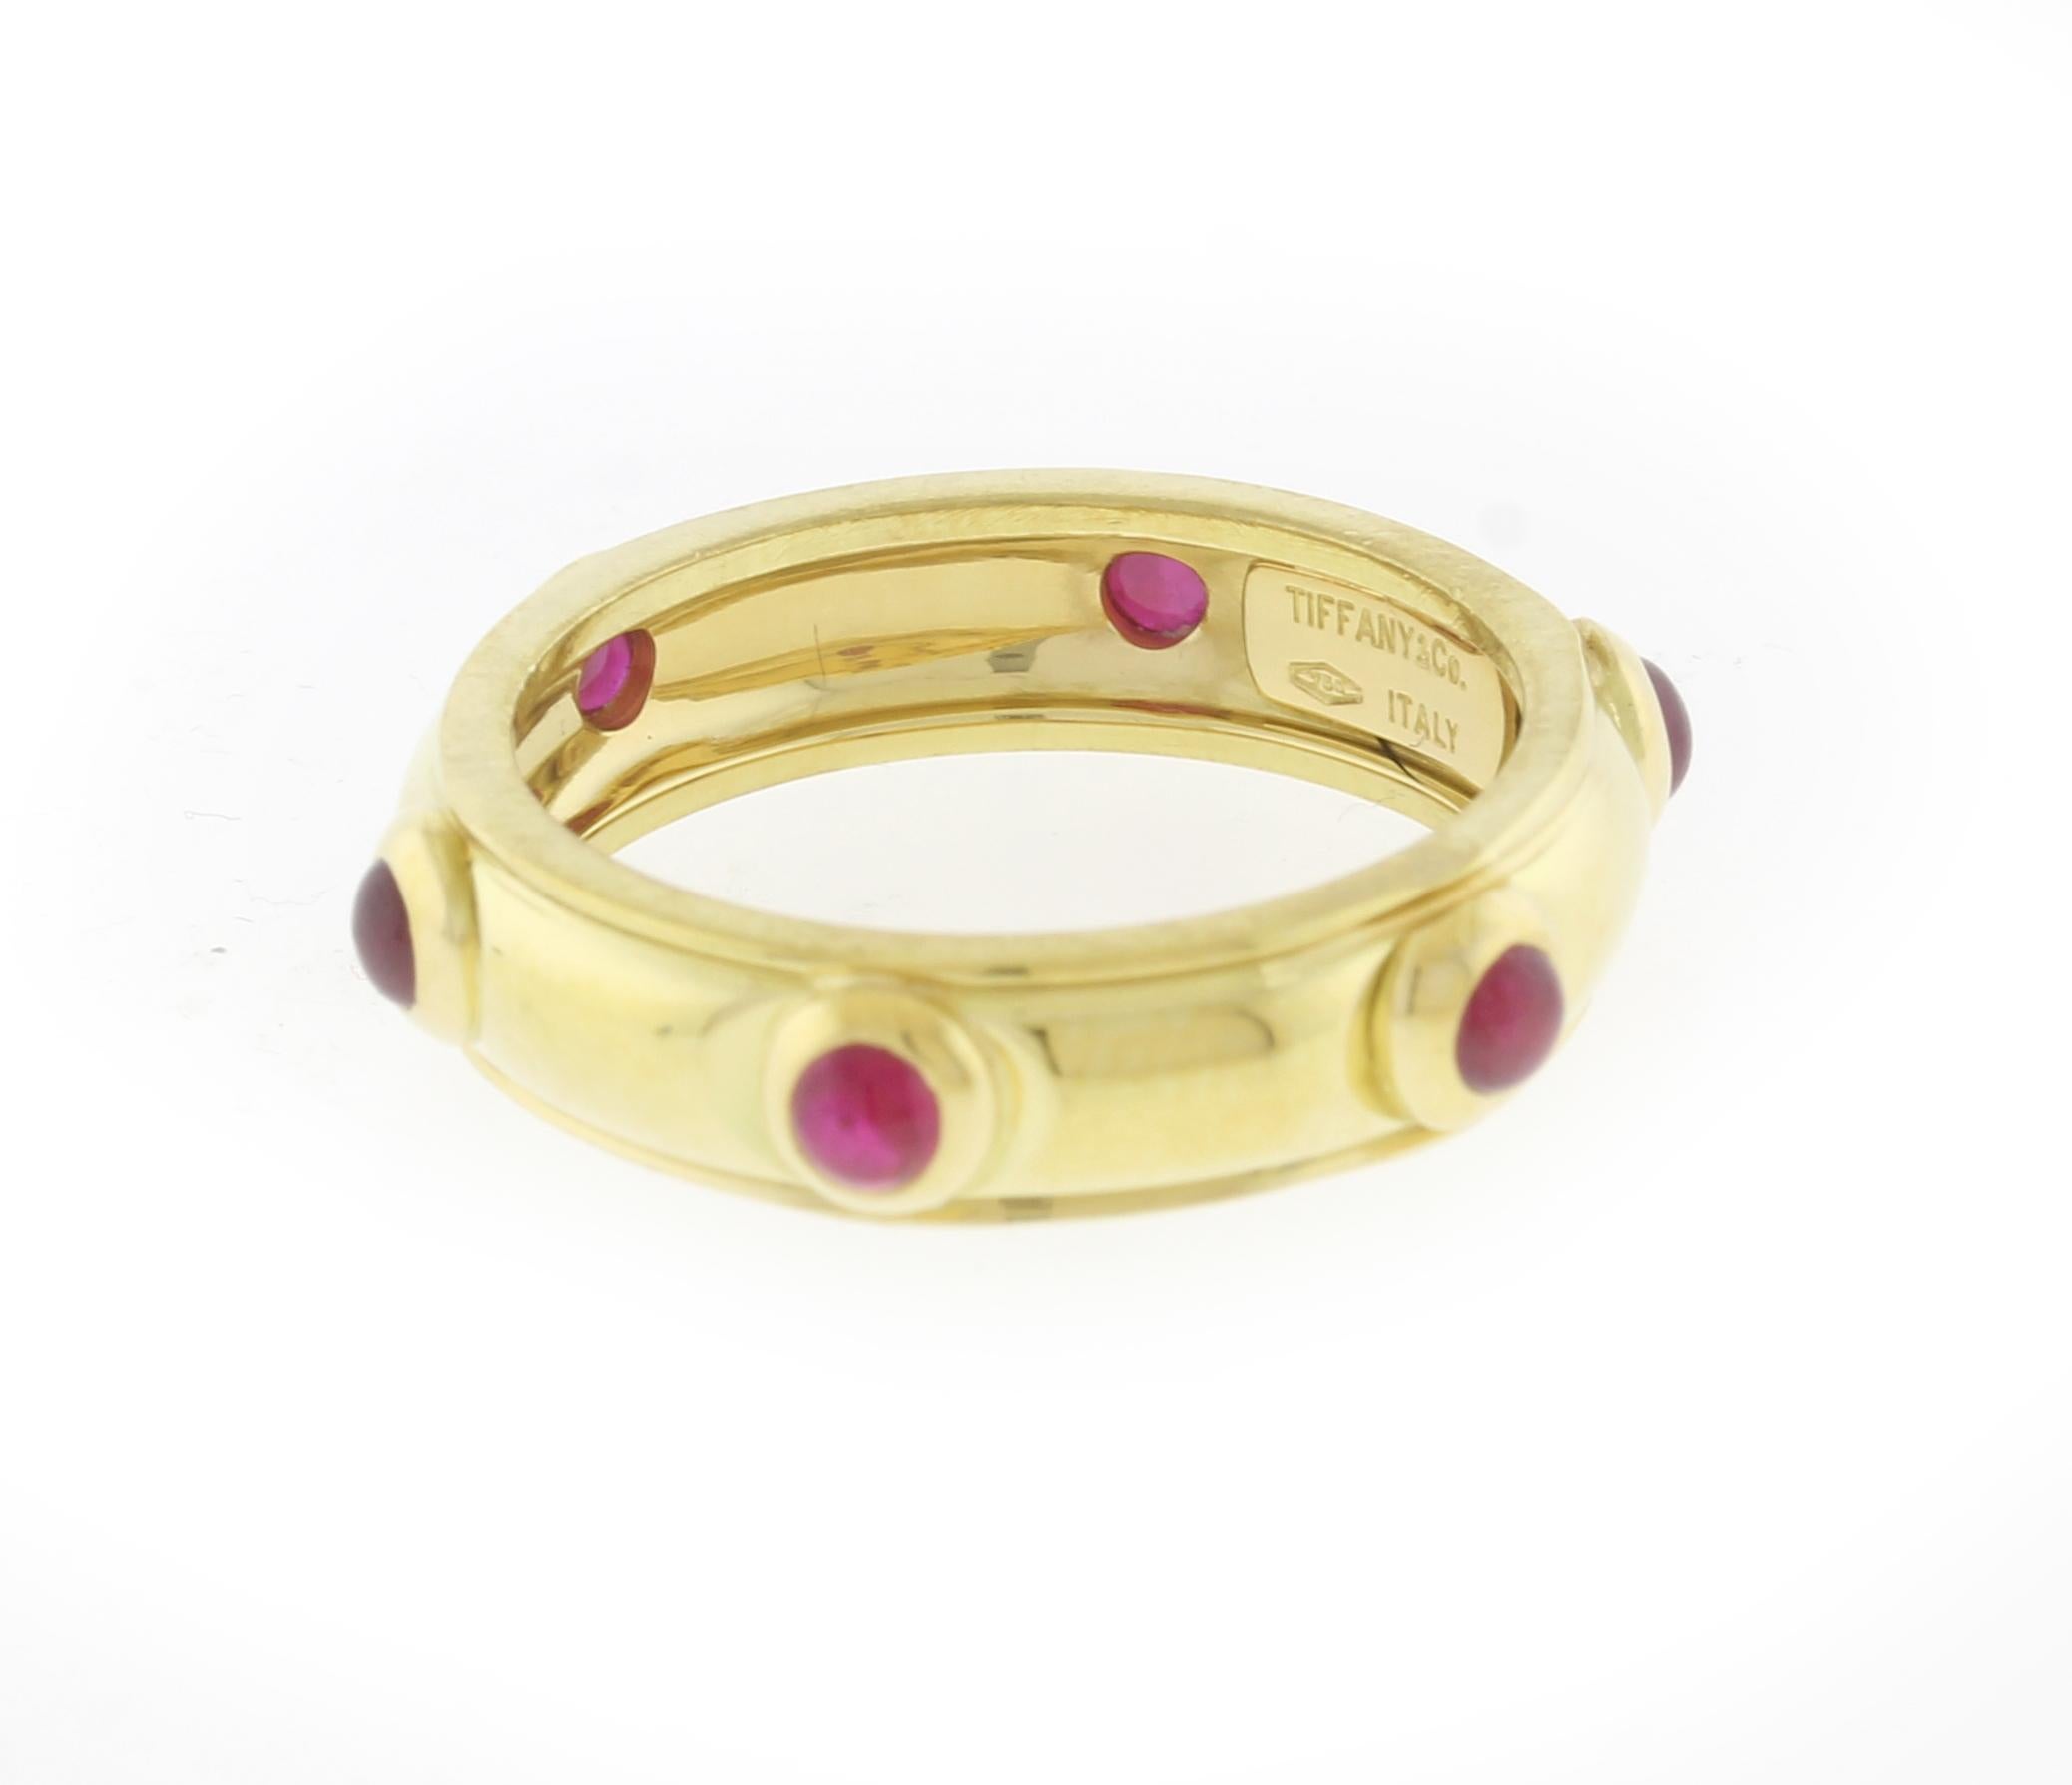 From Tiffany & Co a cabochon ruby band ring. The ring  boast 6 bright 3mm rubies
♦ Designer: Tiffany & Co.
♦ Metal: 18 karat
♦ Circa 1990s
♦ 5.2mm wide
♦ Size 7 ½
♦ 6.3 grams
♦ Packaging: Tiffany Pouch
♦ Condition: Excellent , pre-owned